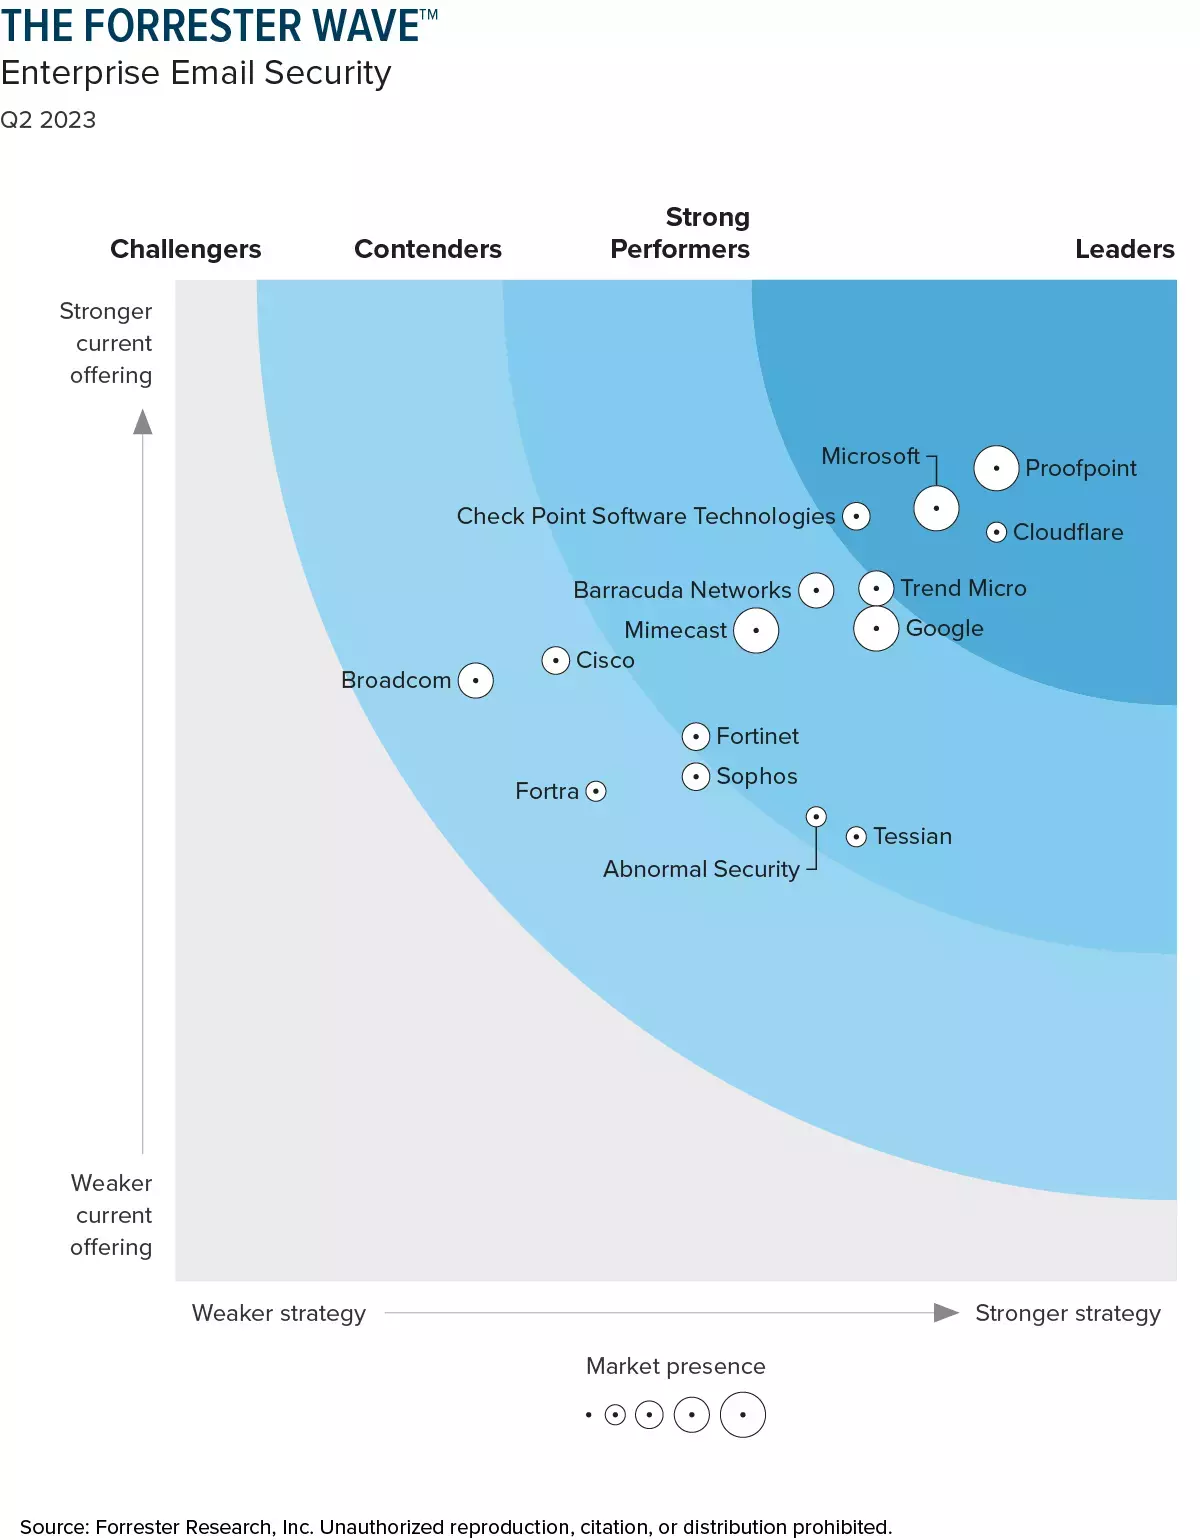 Forrester: Leader, strategy and current offering 